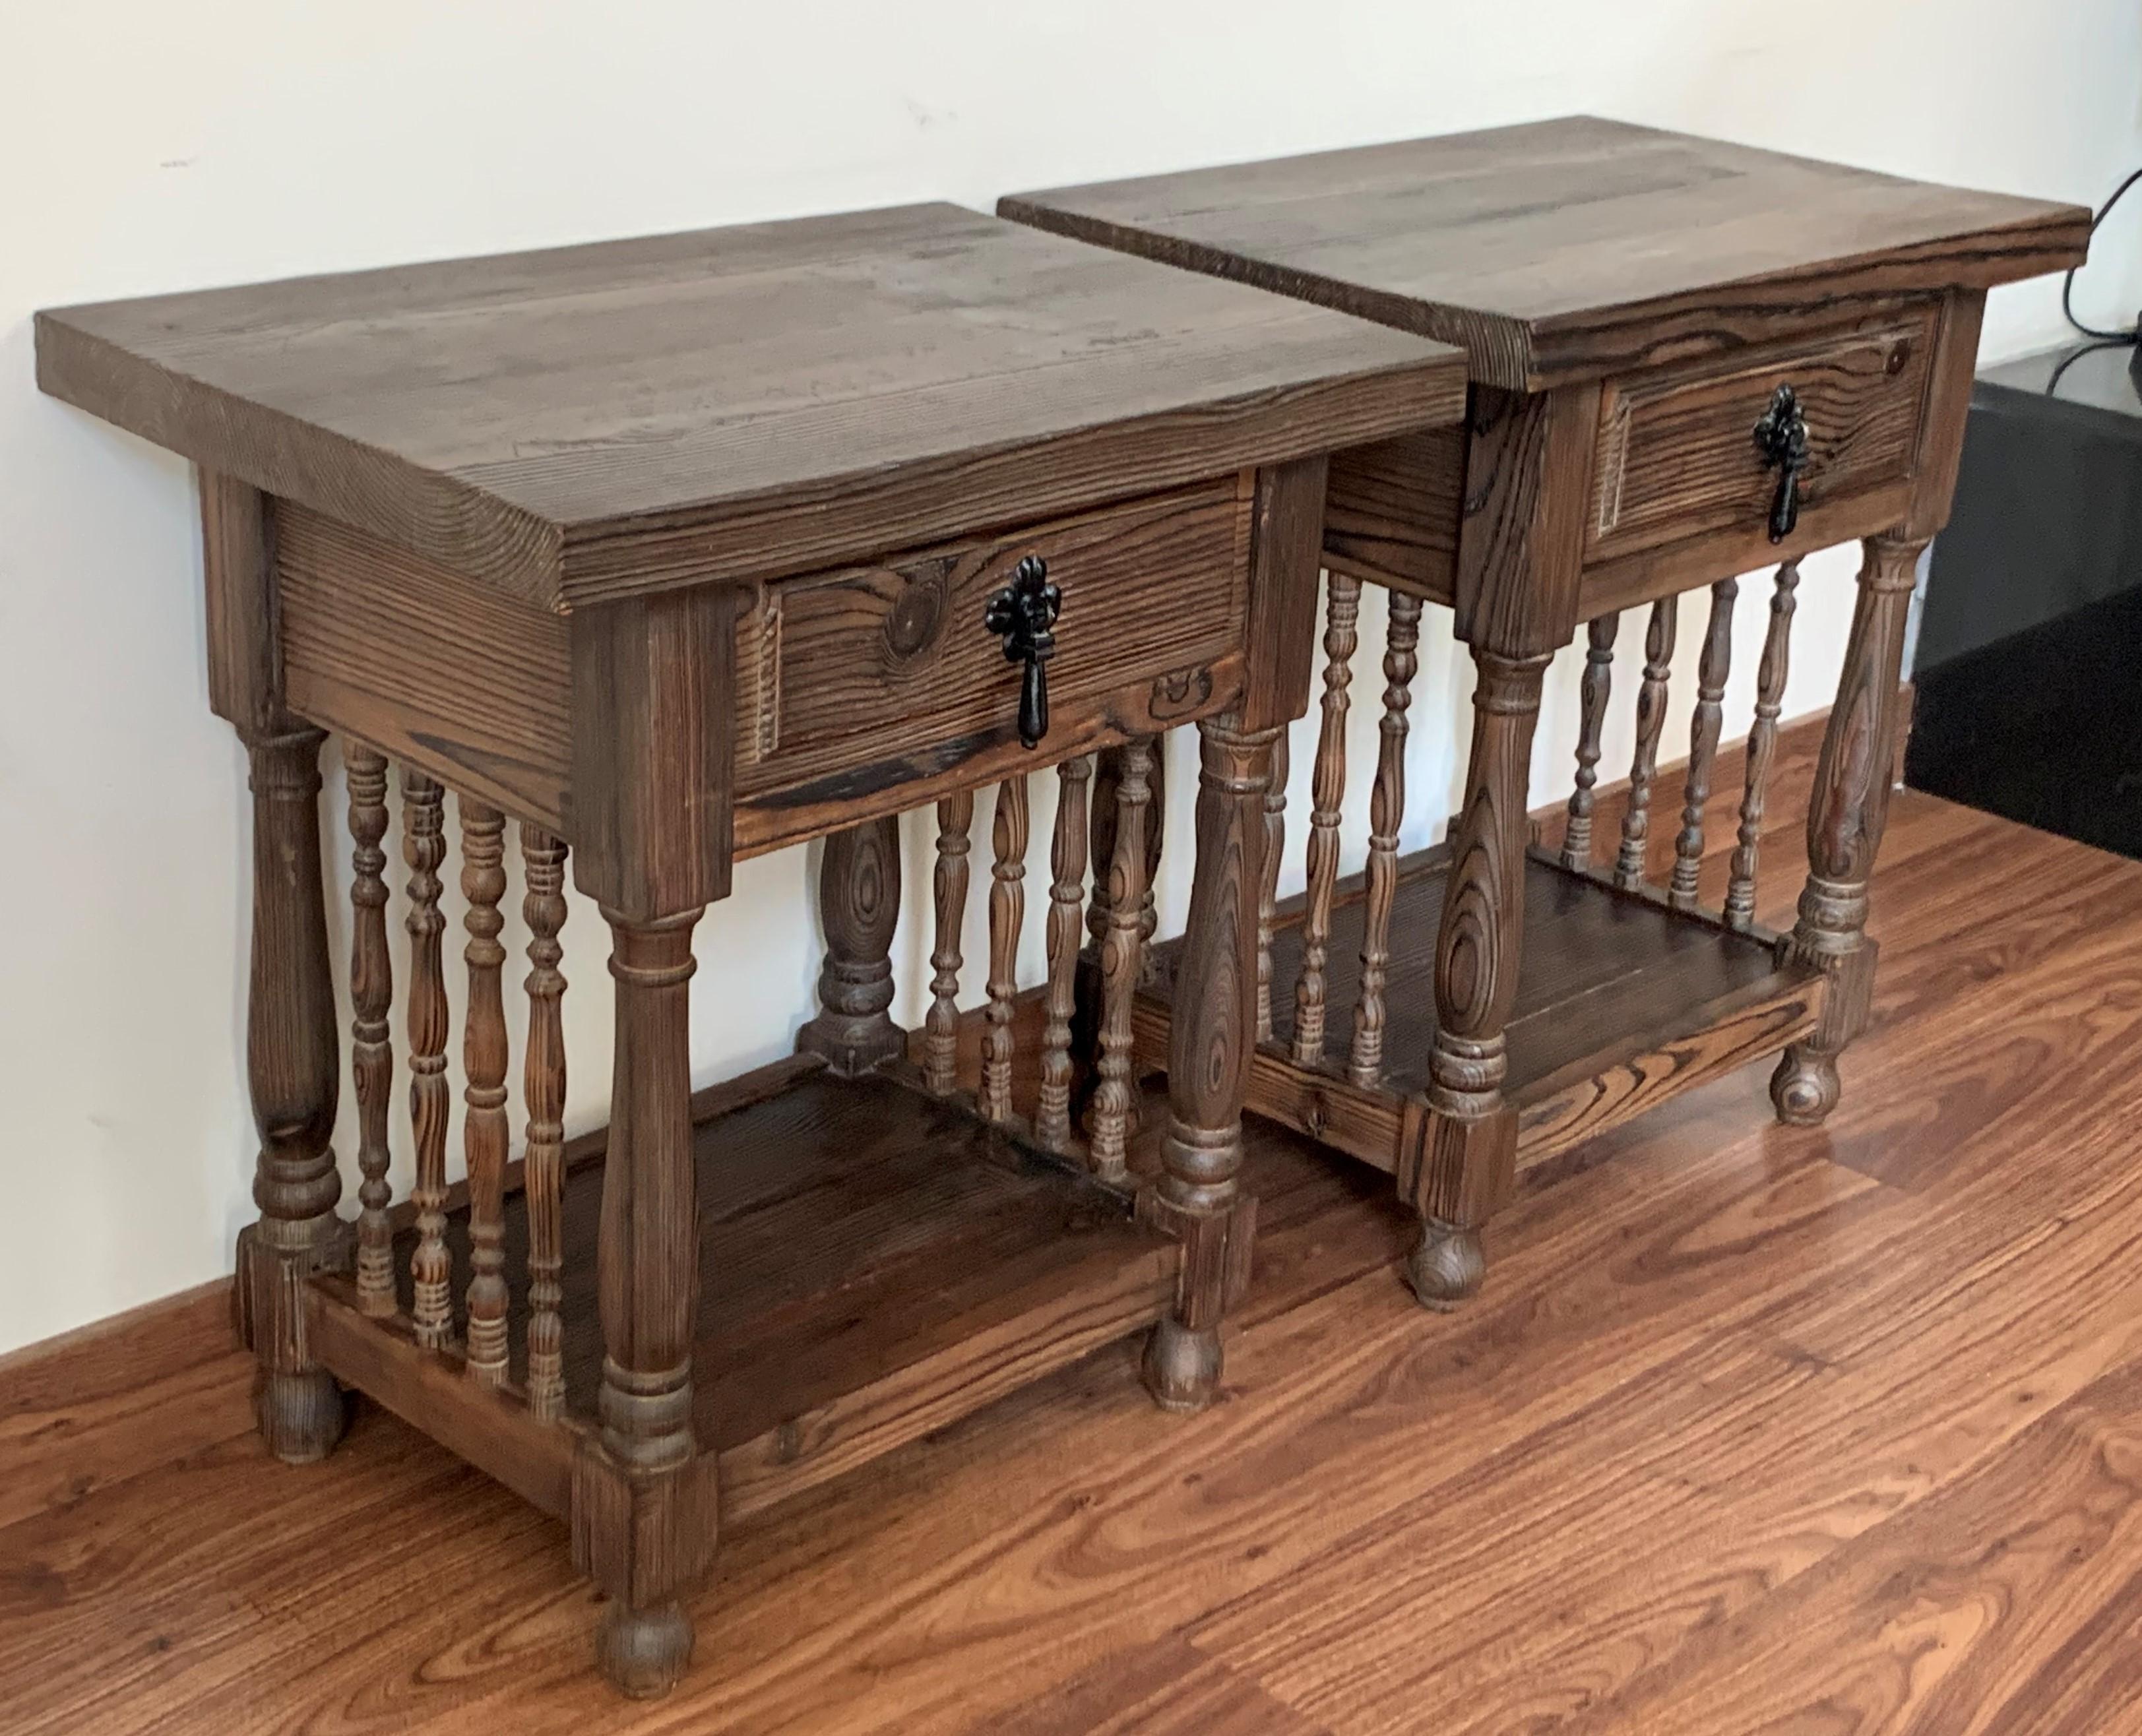 Pine Pair of Catalan, Spanish Nightstands with Carved Bars, Drawer and Open Shelf